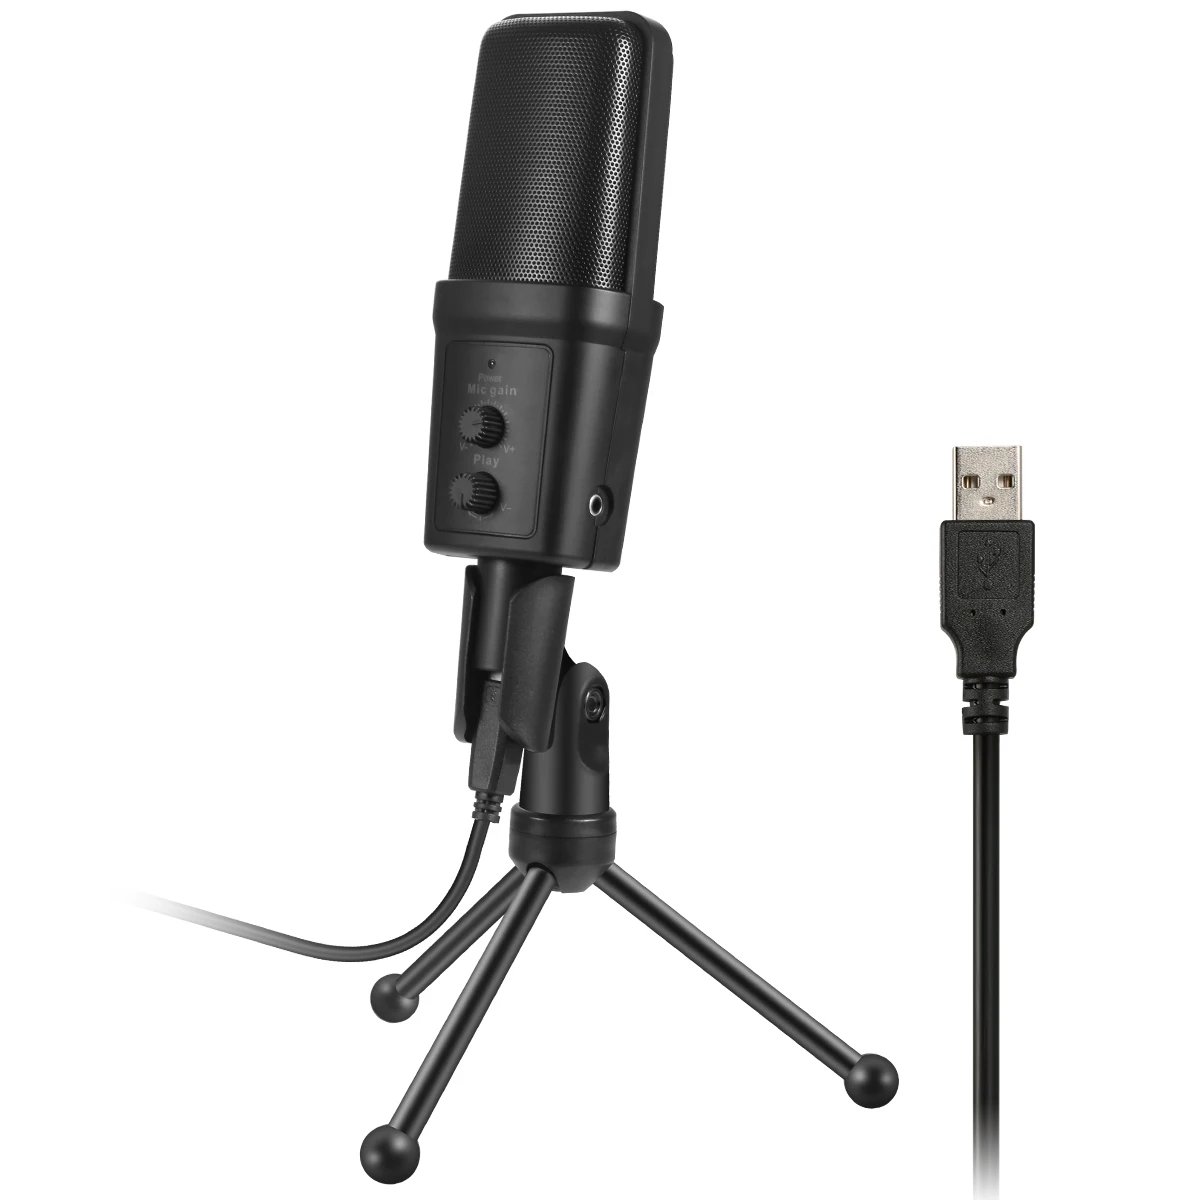 SF-970 Professional Studio Microphone for Podcasting Recording Gaming USB Microphone with Volume Control and Headphone Interface